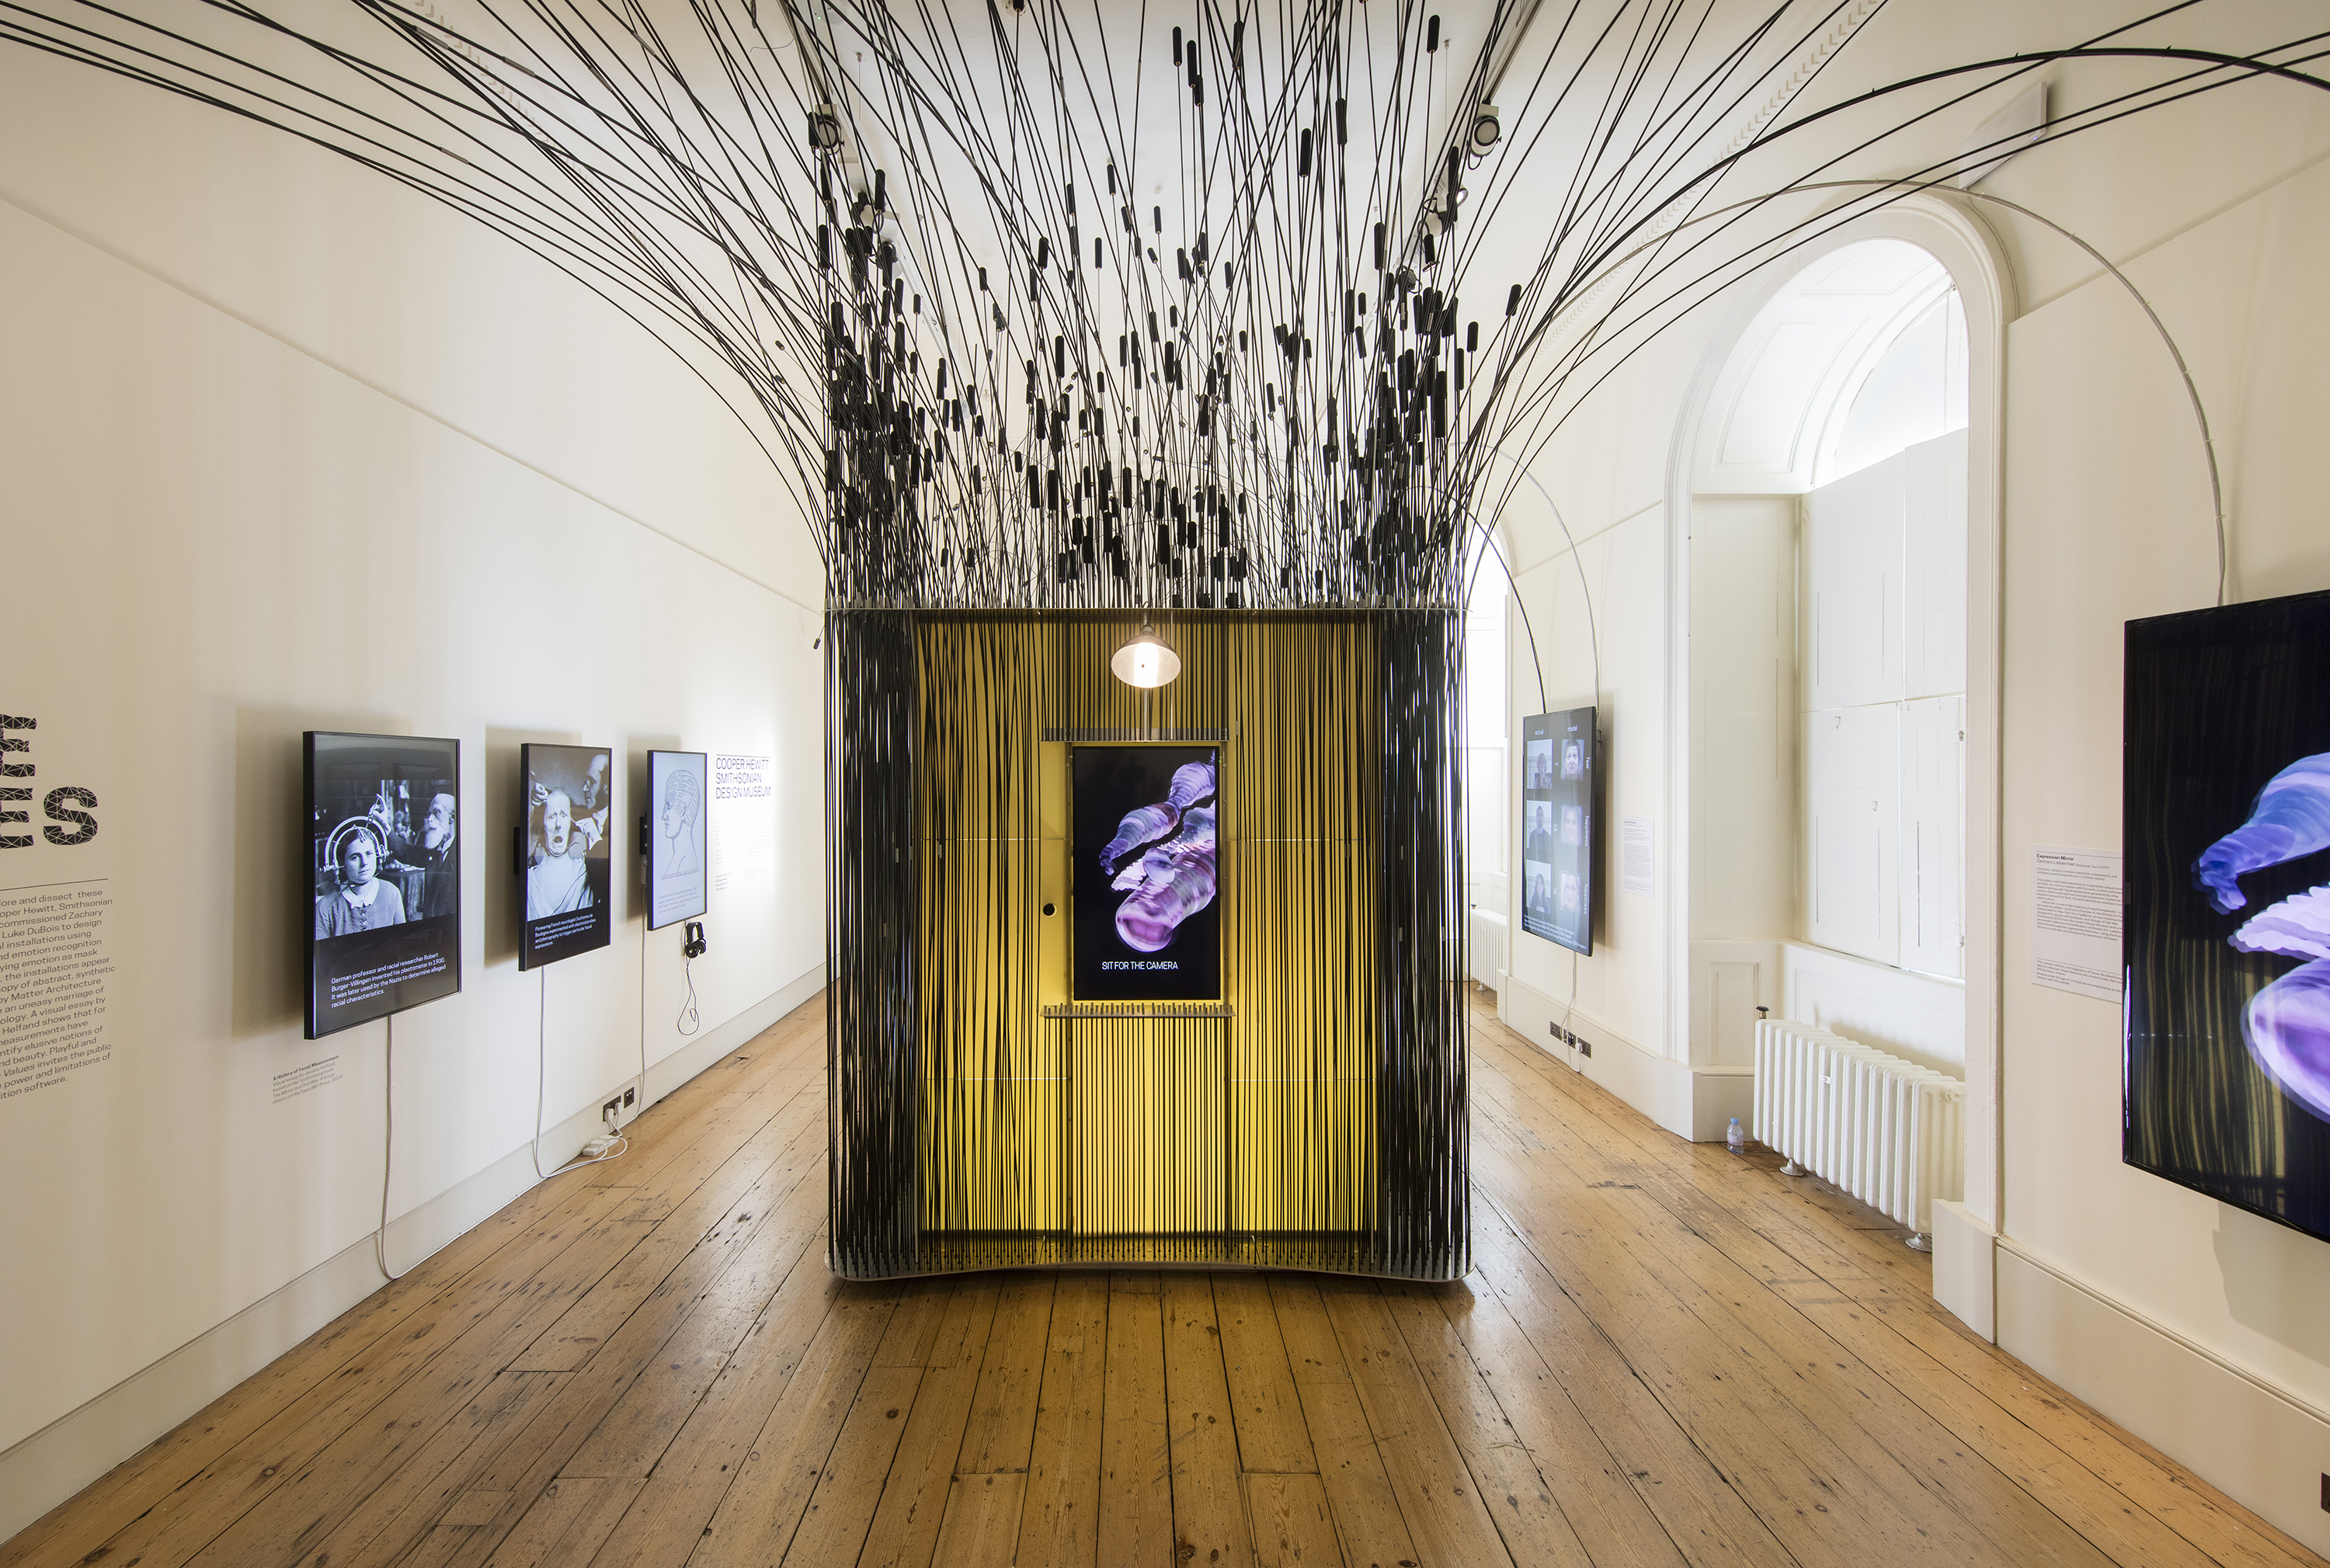 Installation view of "Face Values," organized by Cooper Hewitt, Smithsonian Design Museum for the 2018 London Design Biennale. Photo David Levene.